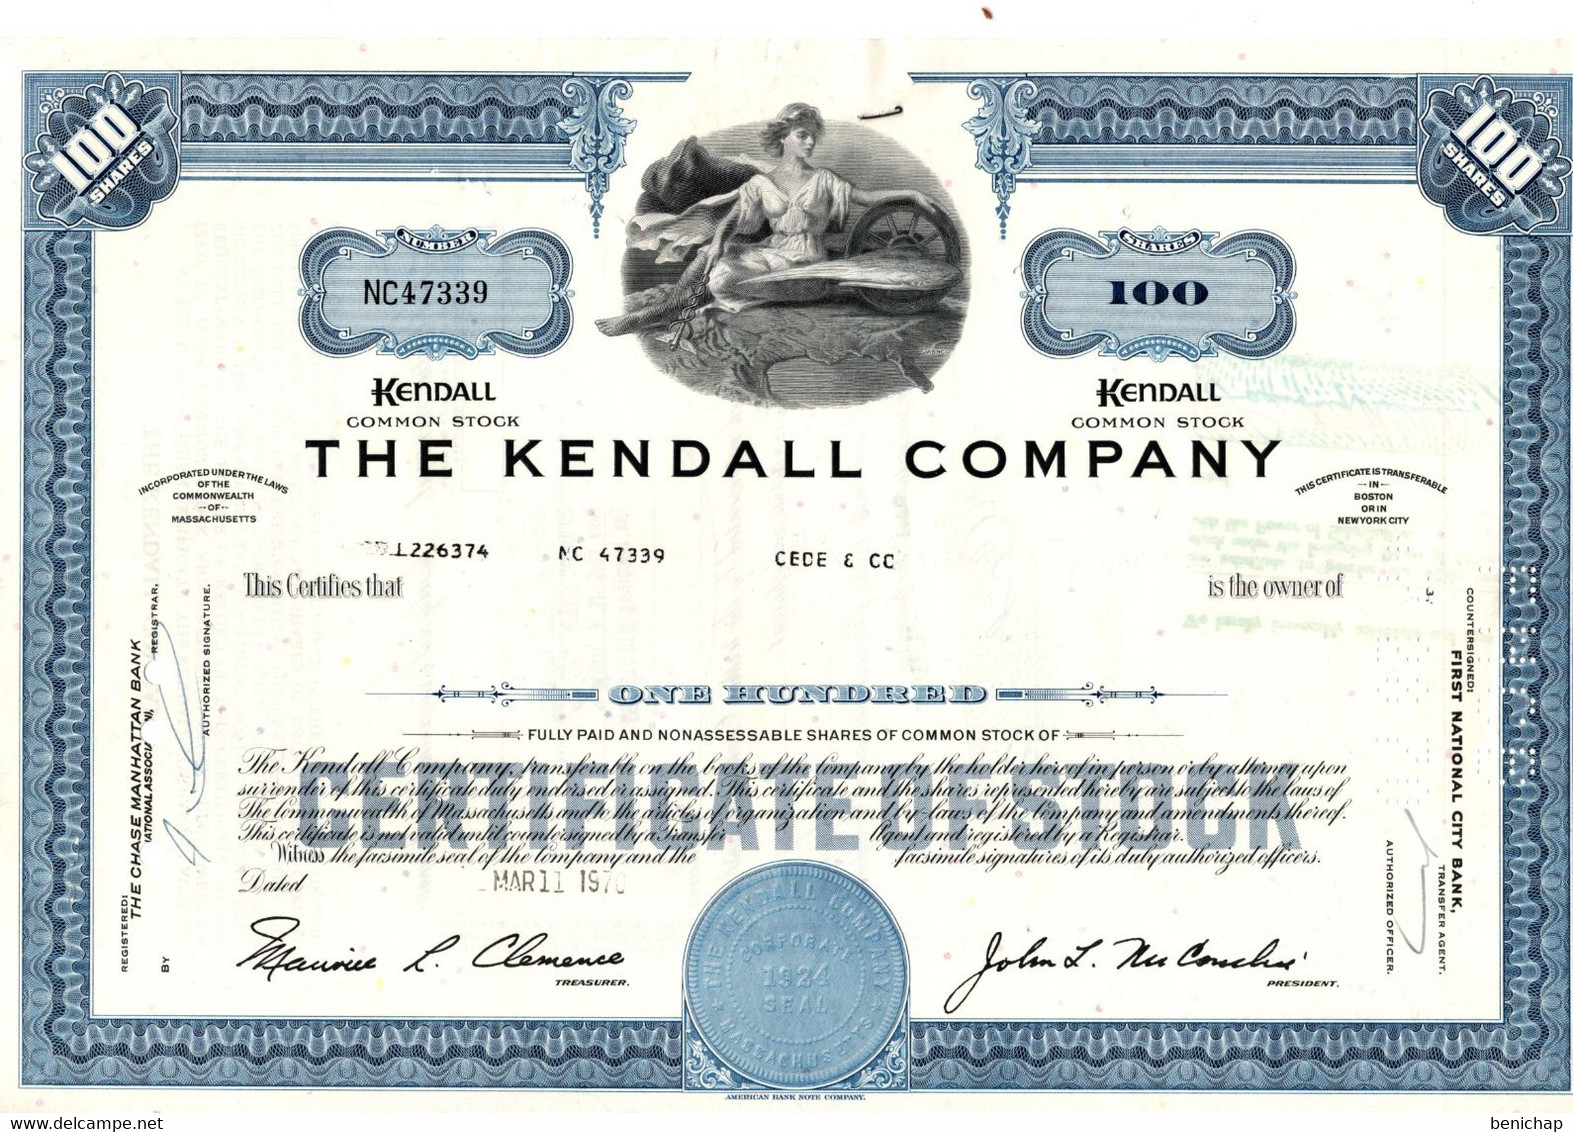 Kendall Company (Maintenant Colgate-Palmolive Company) -  Henry P. Kendall - 1970 - Industry